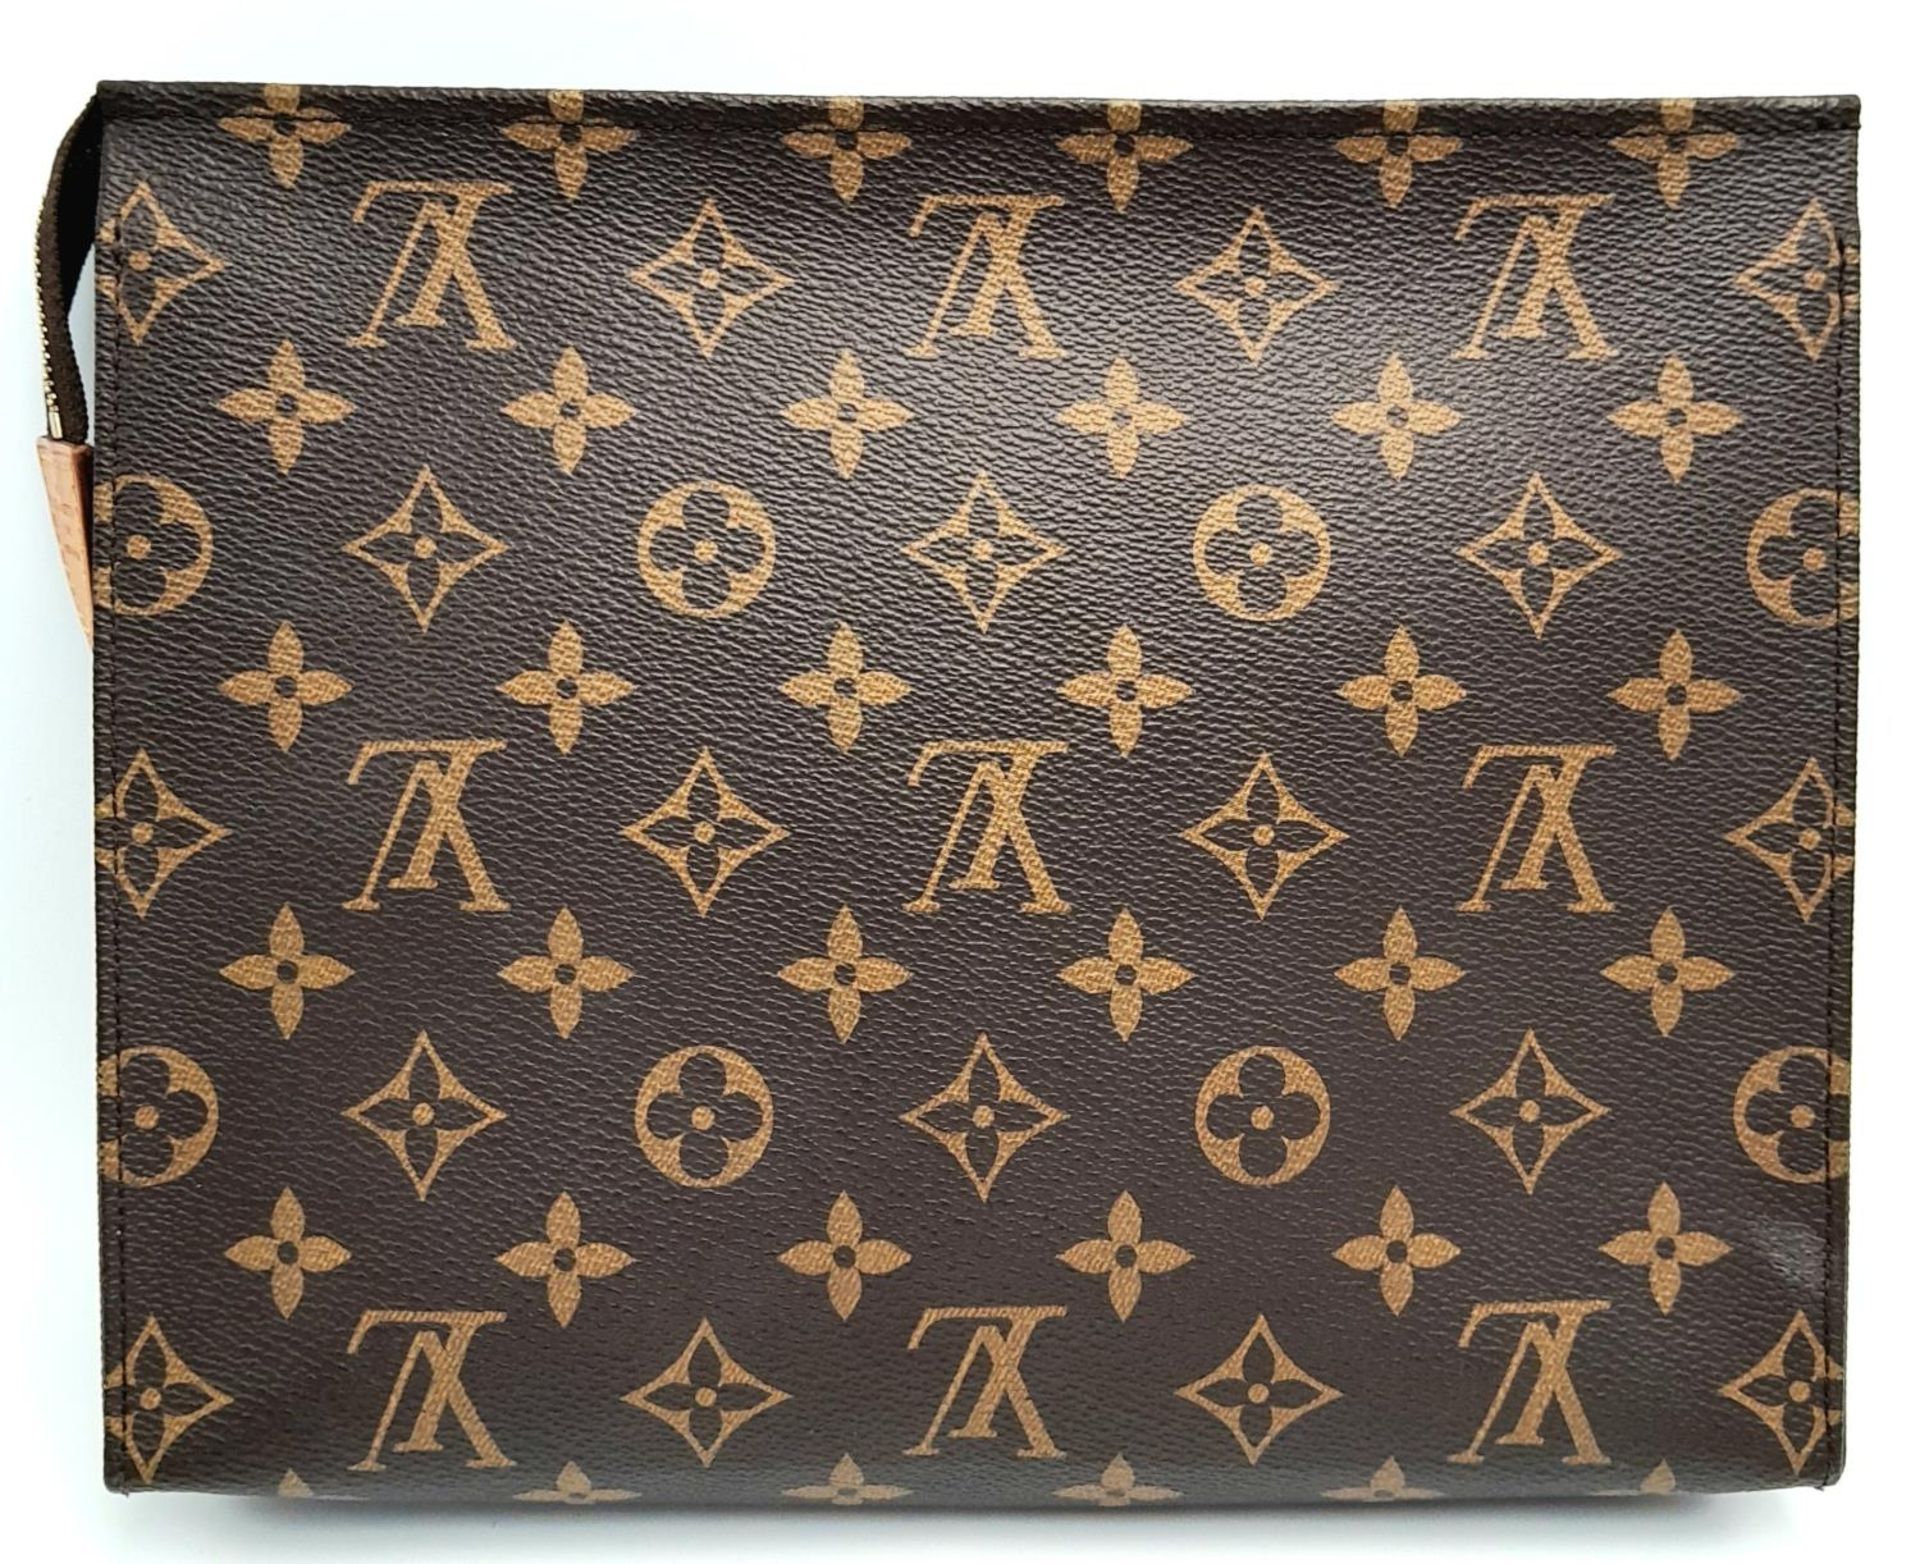 A Louis Vuitton Toiletries Pouch. Monogramed canvas exterior with gold-toned hardware and zipped top - Image 4 of 9